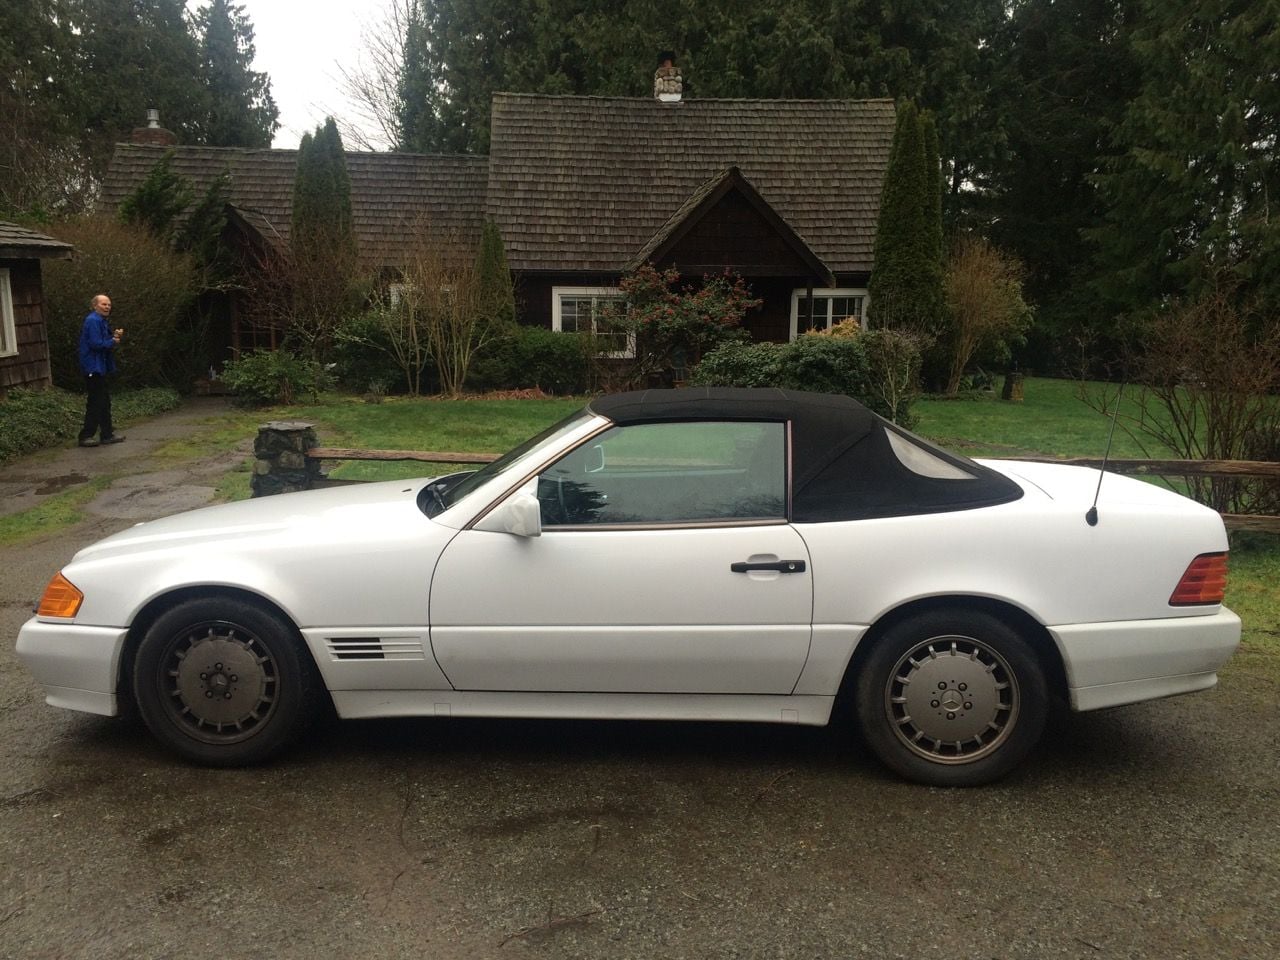 1992 Mercedes-Benz 500SL - Rare - German Built - Classic 1992 Mercedes 500 SL Roadster - Used - VIN WDBFA66E5NF039778 - 2WD - Automatic - Convertible - White - Langley, WA 98260, United States